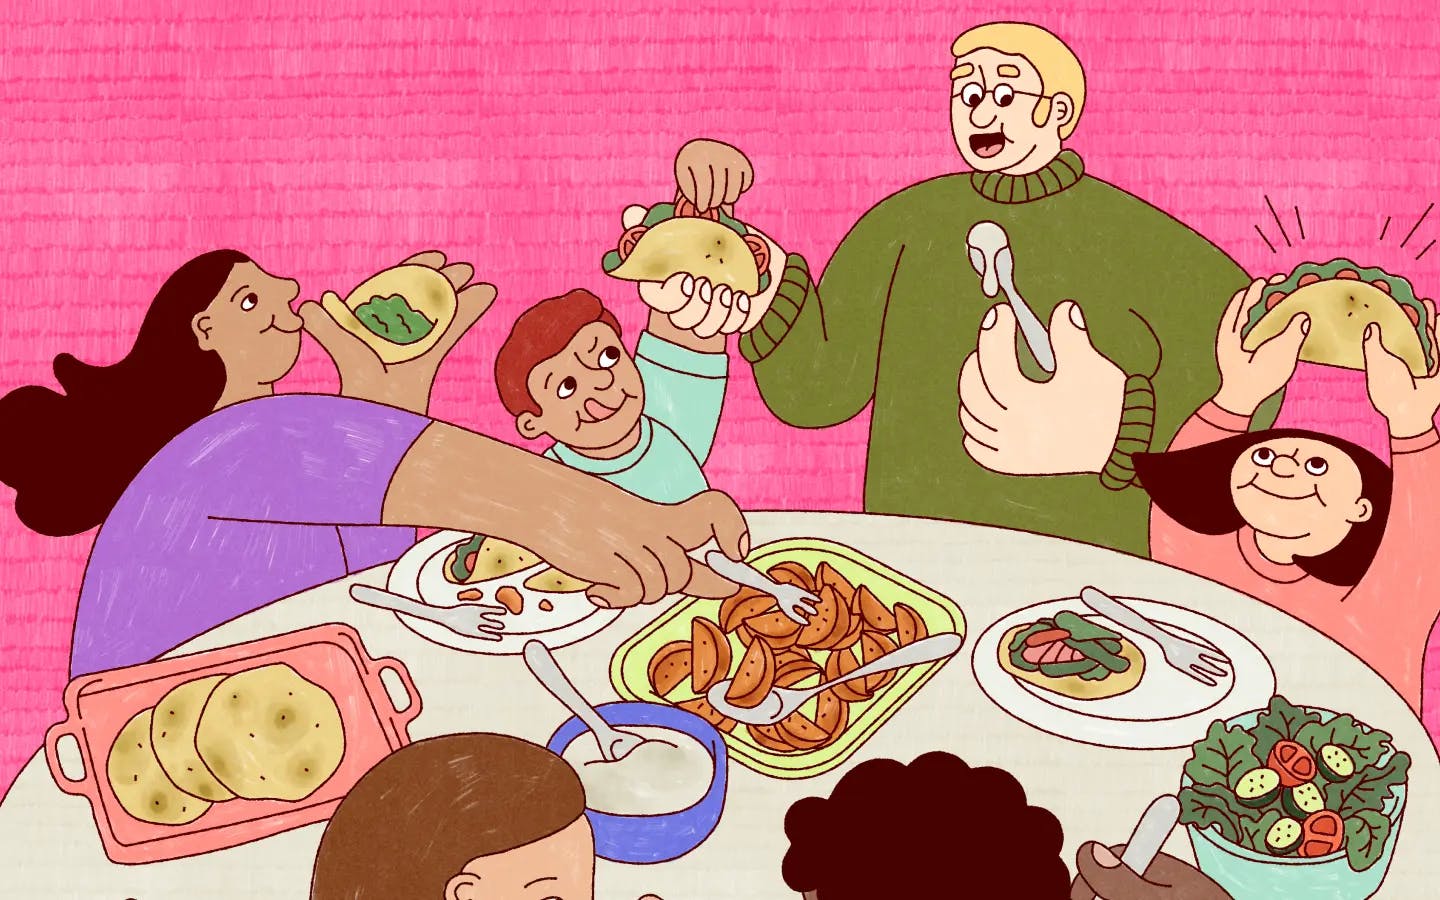 A colorful illustration of a family sharing food